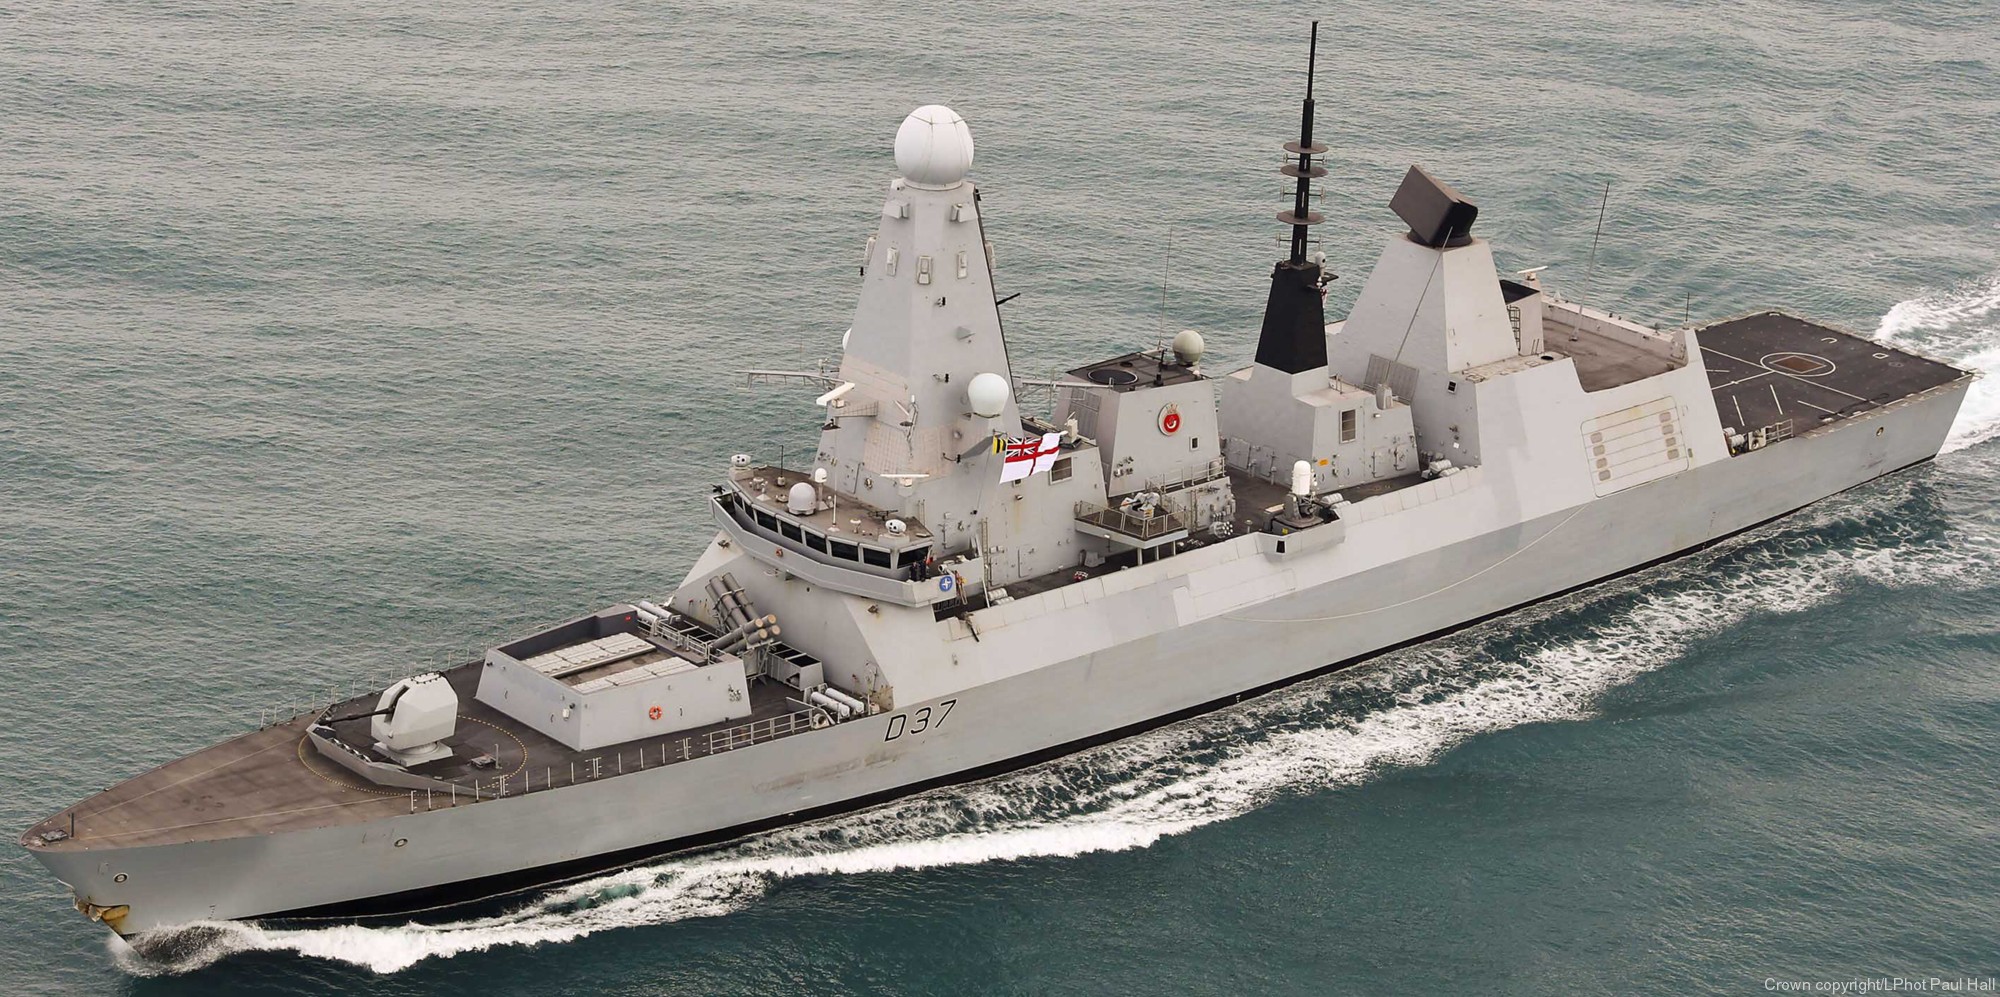 d37 hms duncan d-37 type 45 daring class guided missile destroyer ddg royal navy sea viper bae systems 27x